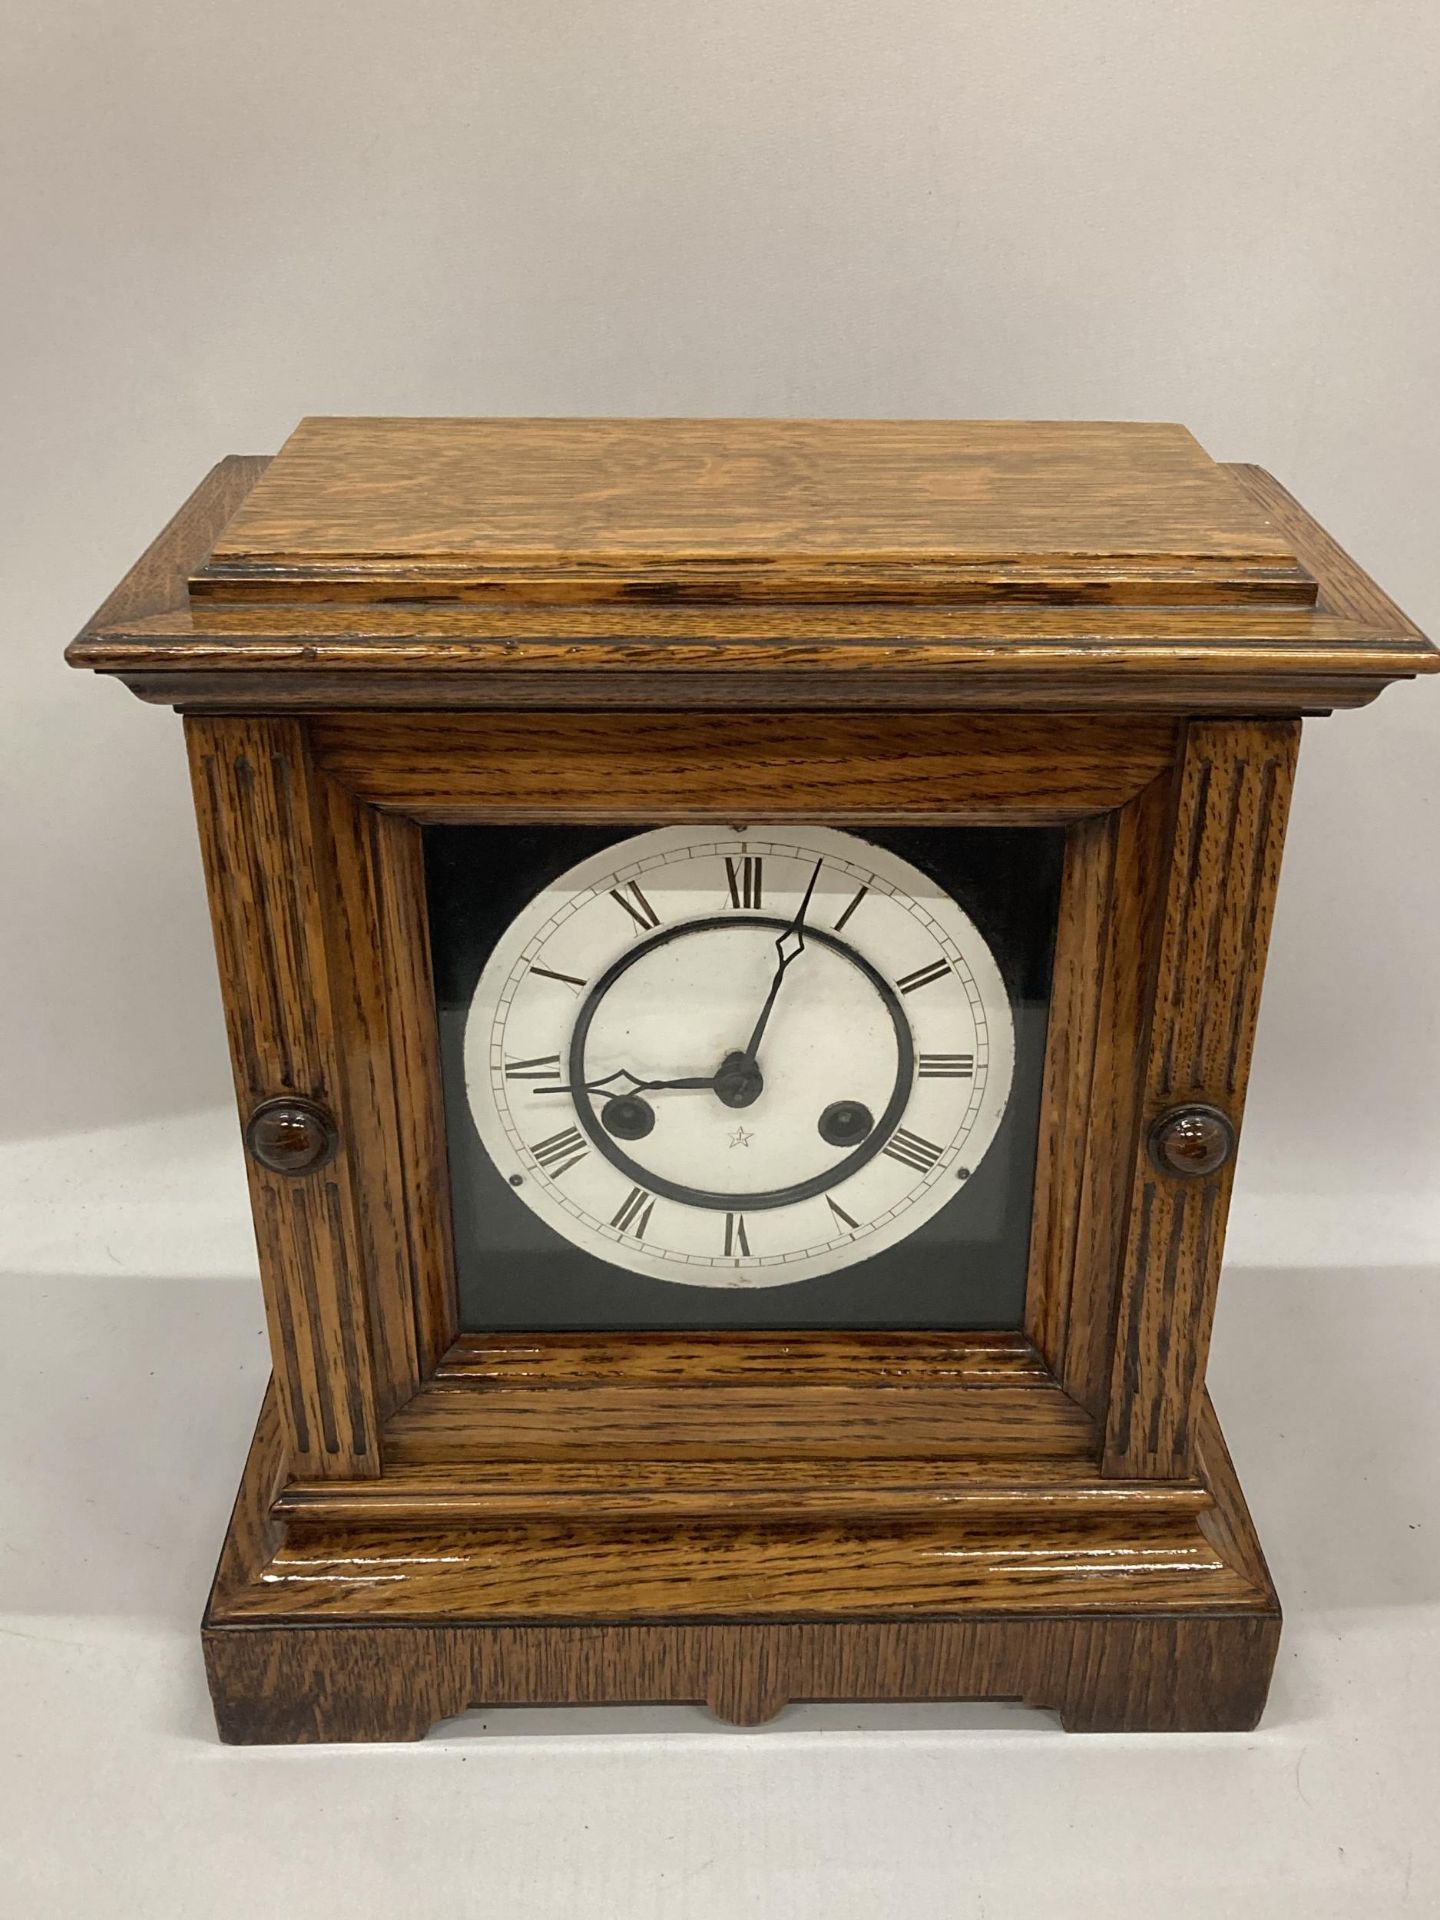 AN EARLY 20TH CENTURY JUNGHANS, GERMAN, OAK CASED CHIMING MANTLE CLOCK WITH KEY